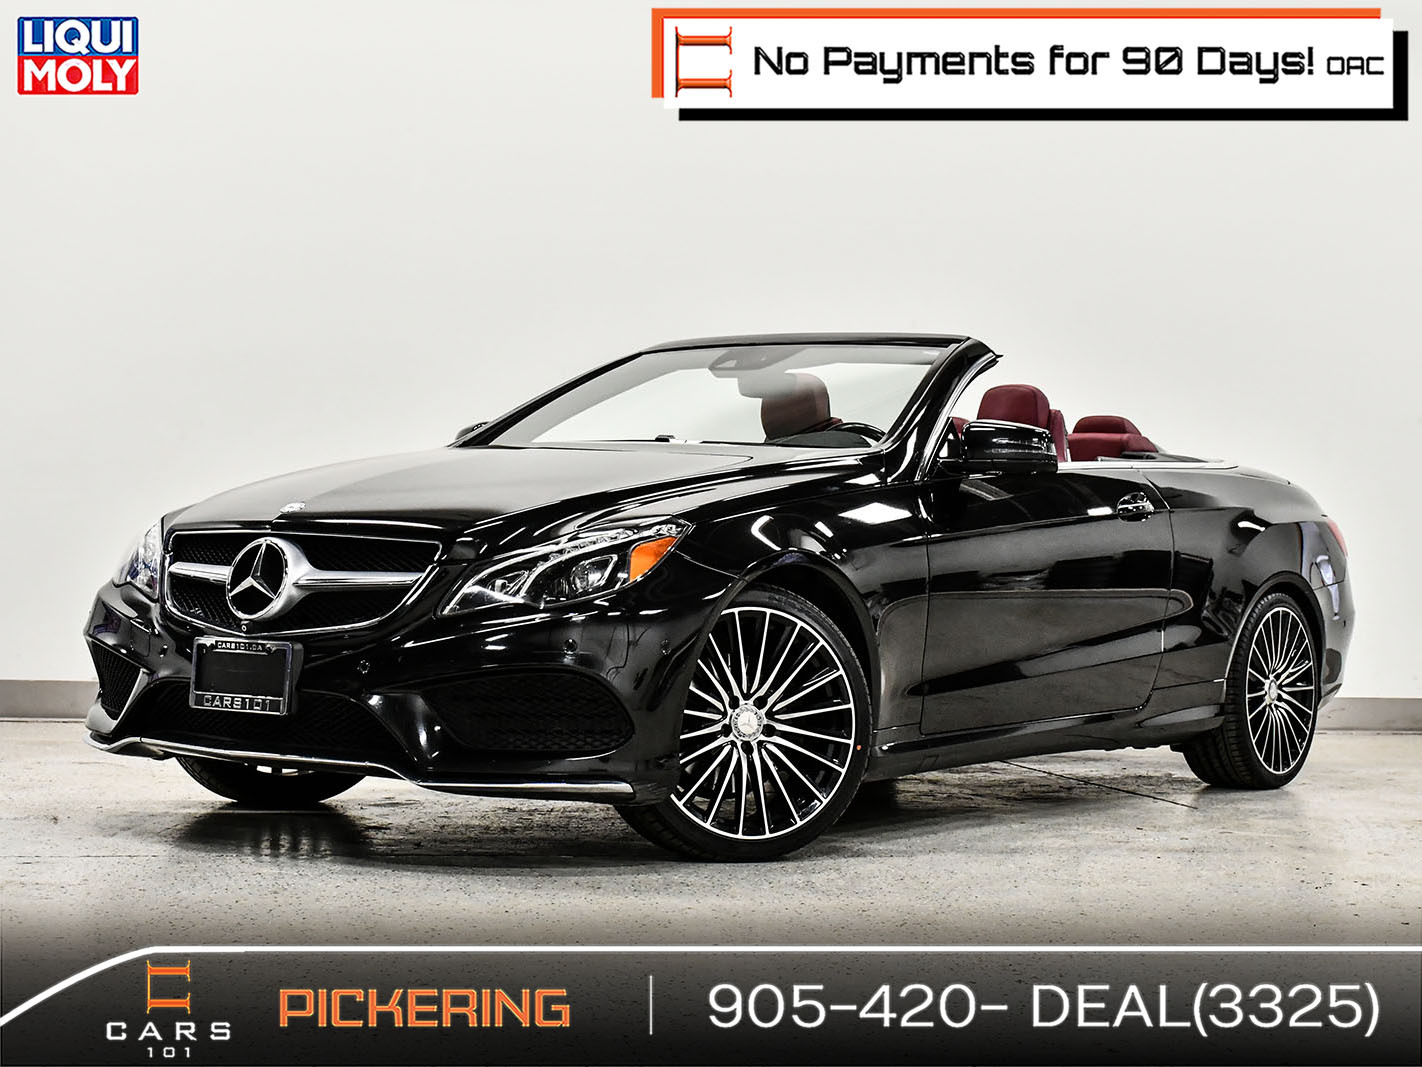 2014 Mercedes-Benz E-Class CABRIOLET|360 CAM|LOW KM'S|HTD&COOLED SEATS|HARMAN